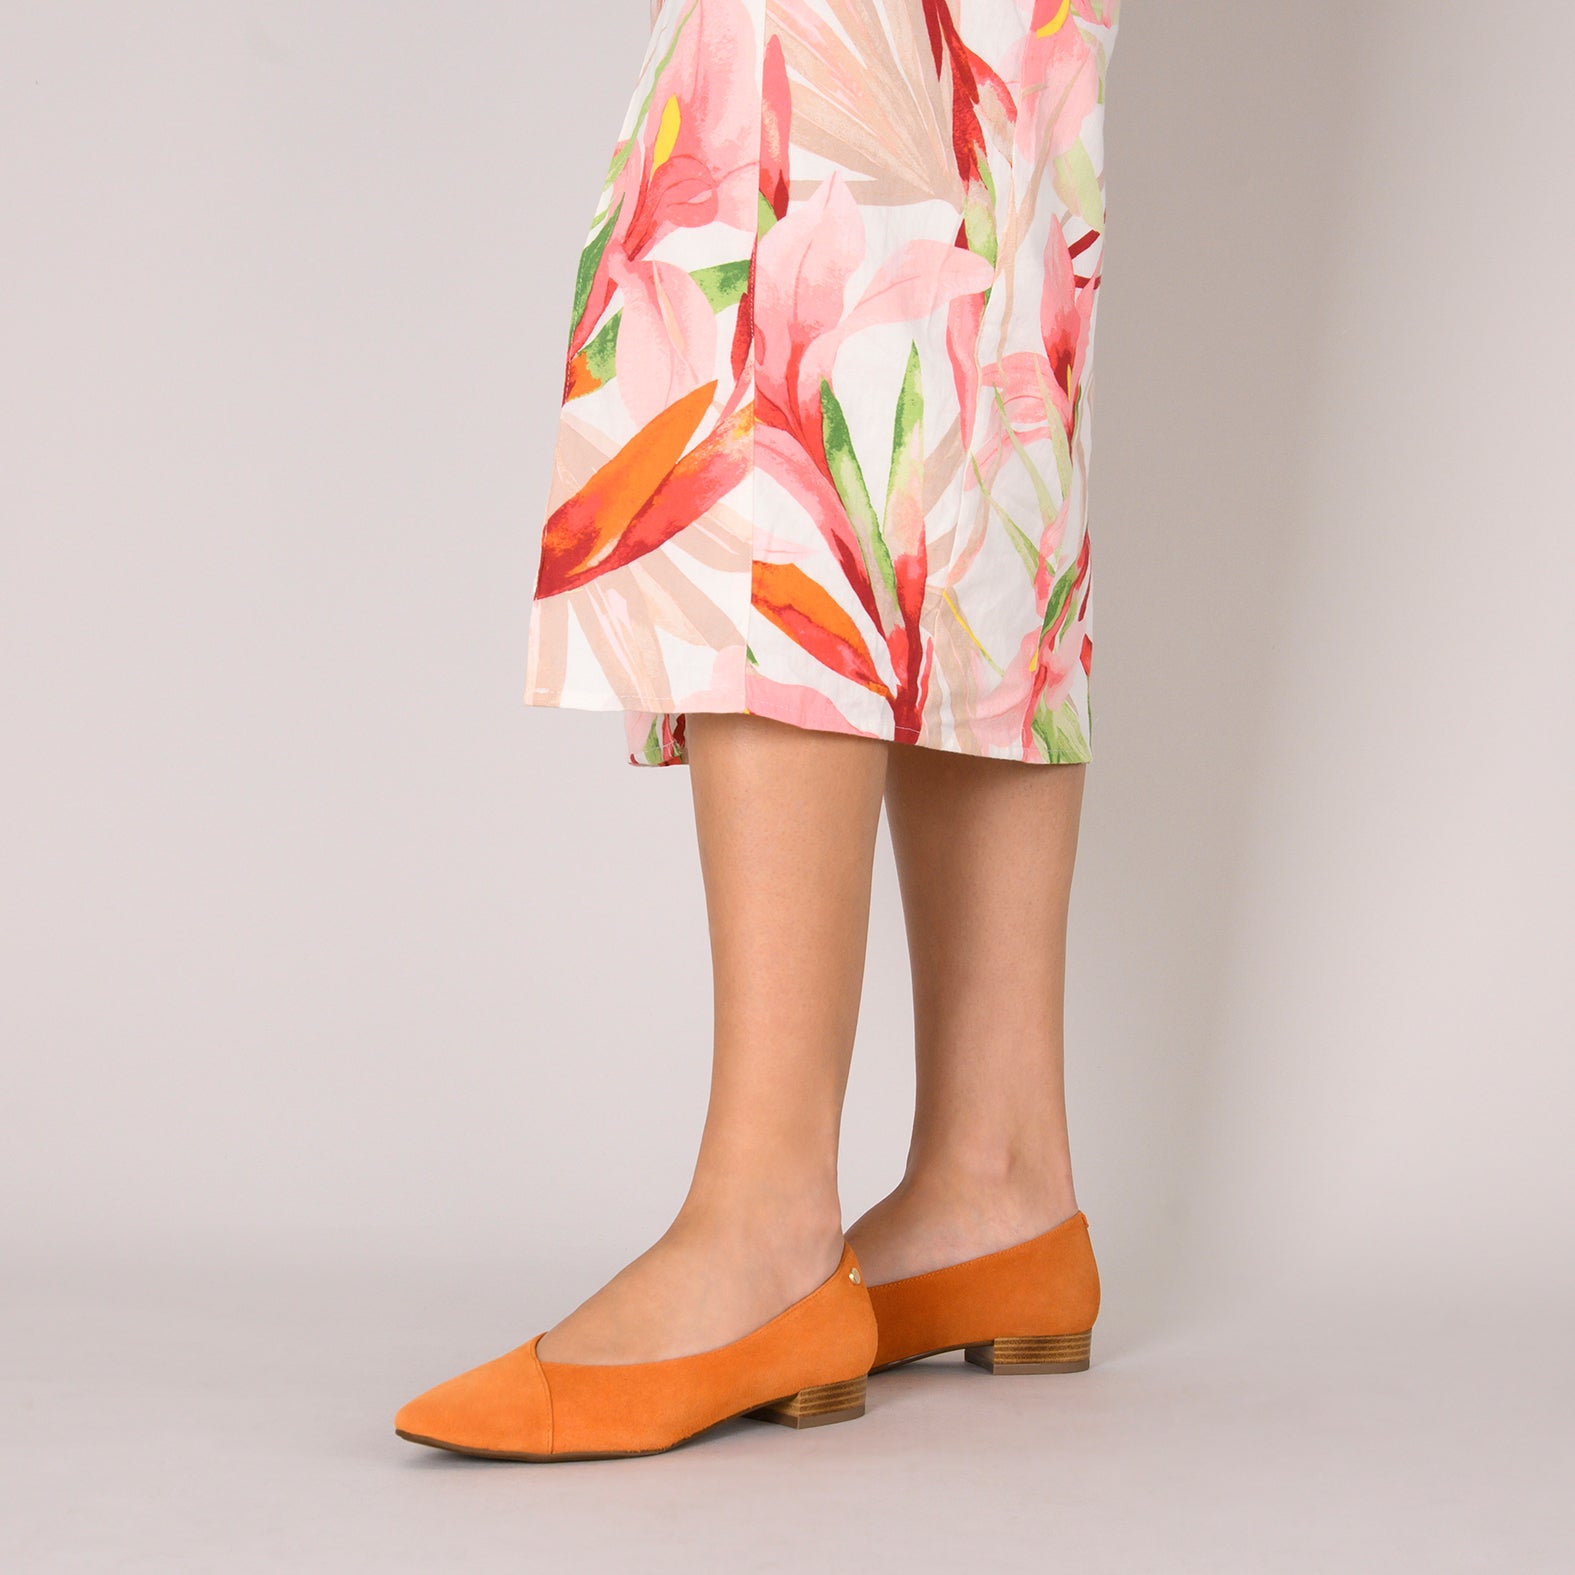 MARIE – ORANGE pointed flats